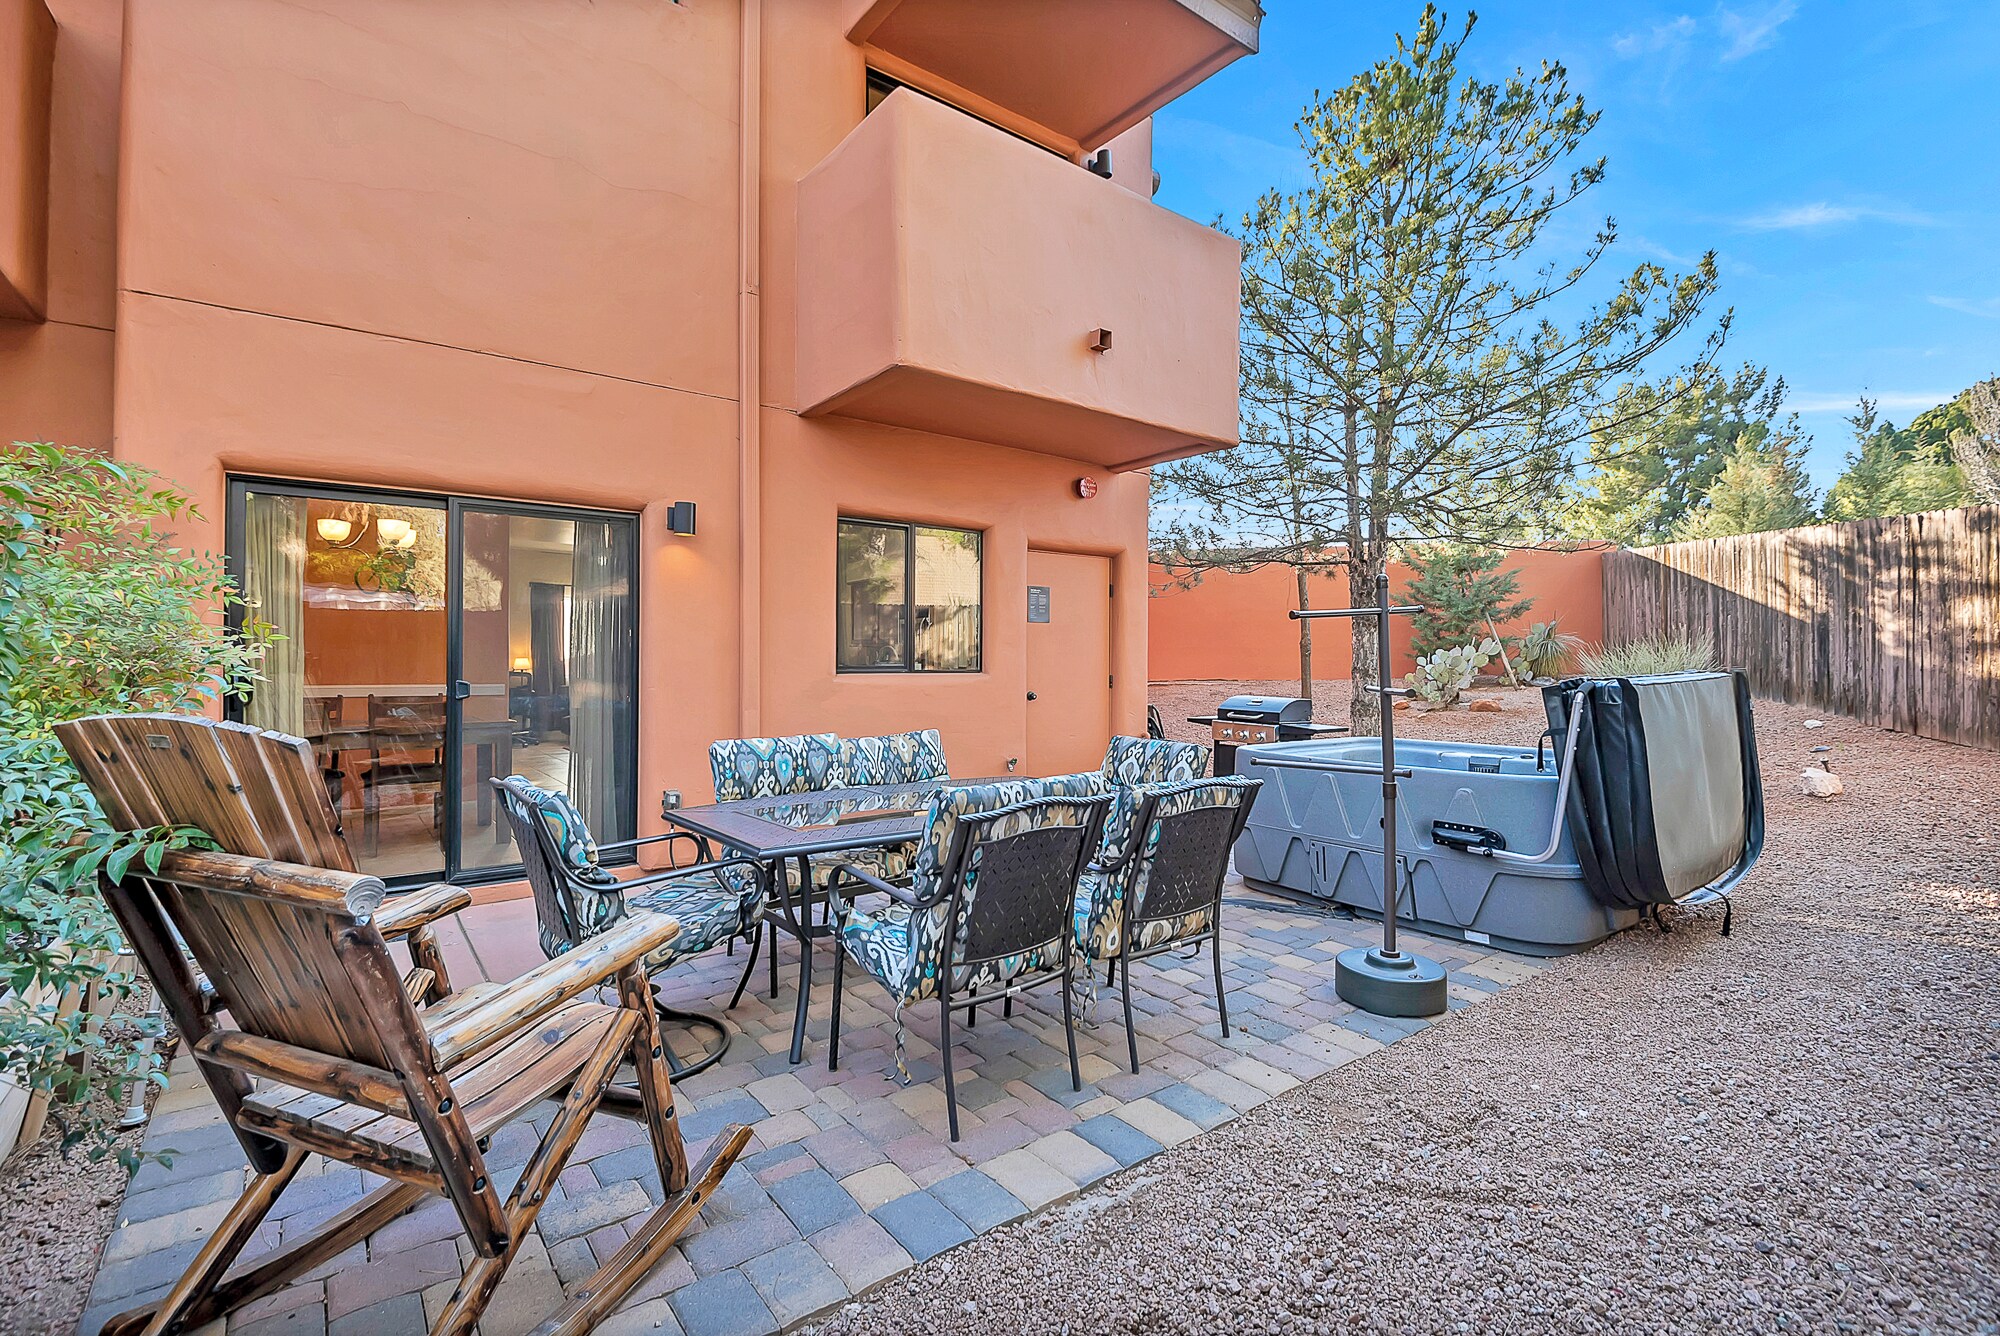 Private Backyard with Rocking Chairs, Outdoor Dining and Hot Tub